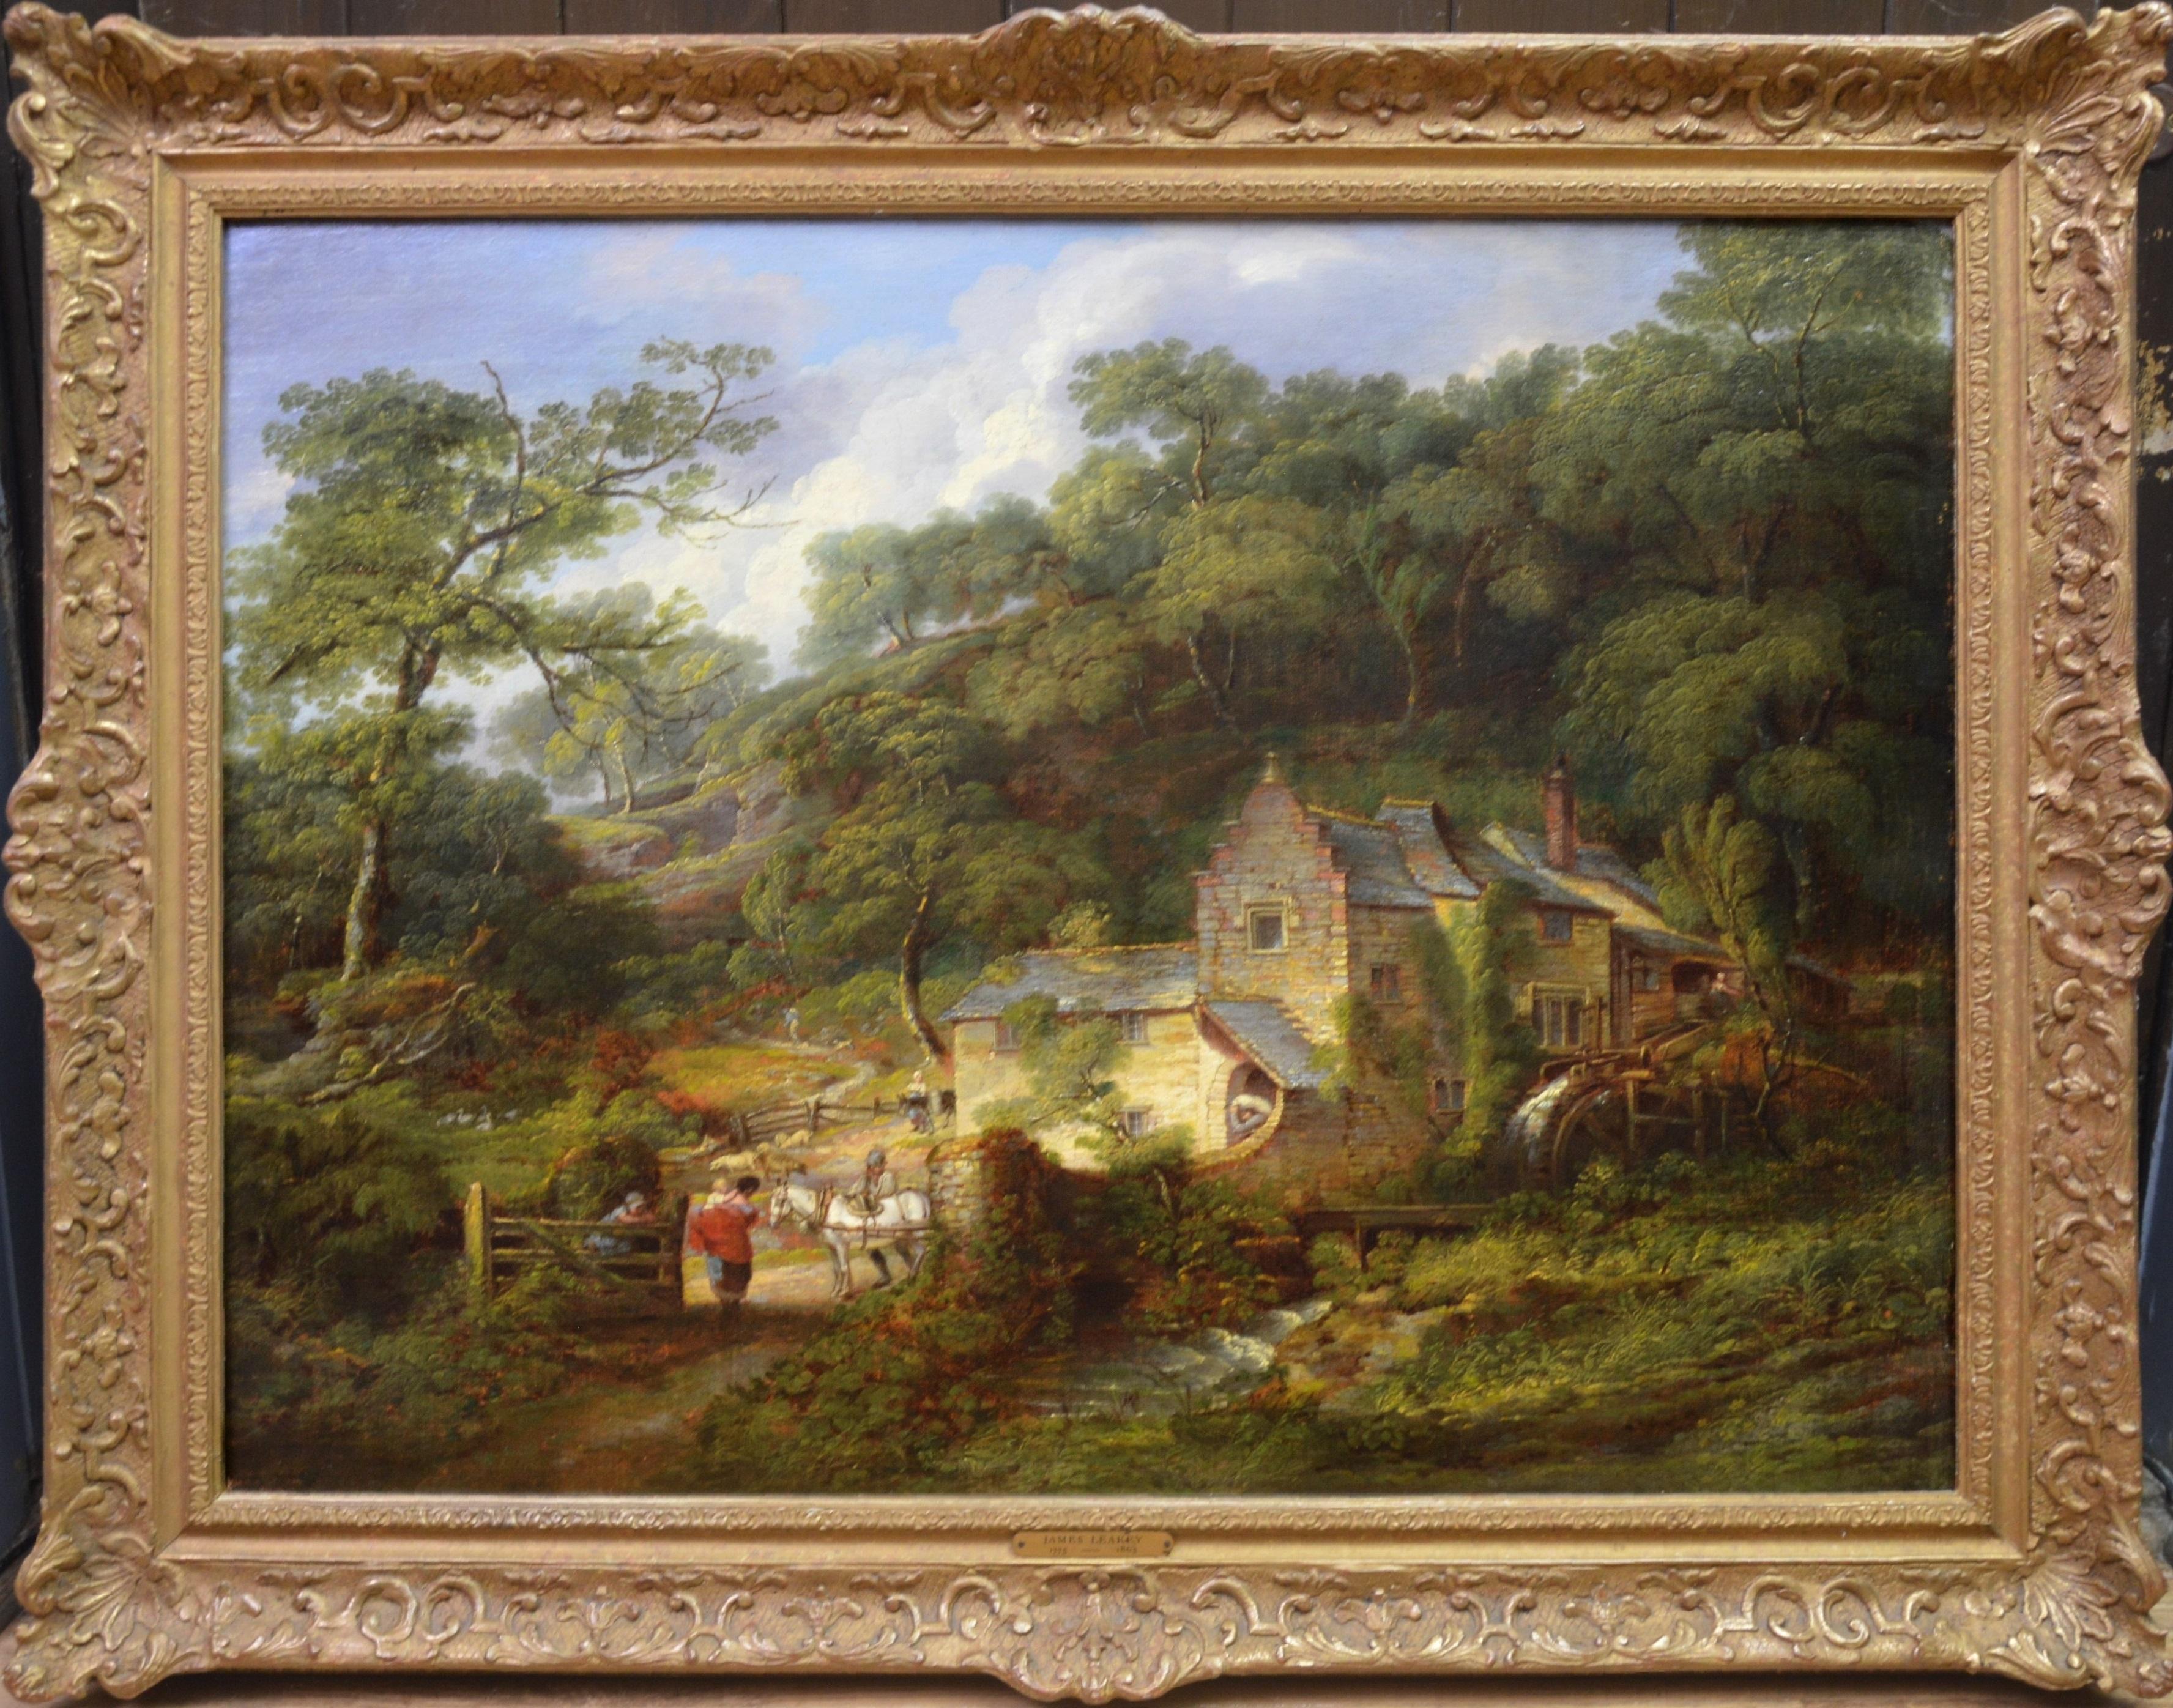 James Leakey Landscape Painting - Berry Pomeroy Mill - 19th Century English Landscape Oil Painting Albert Museum